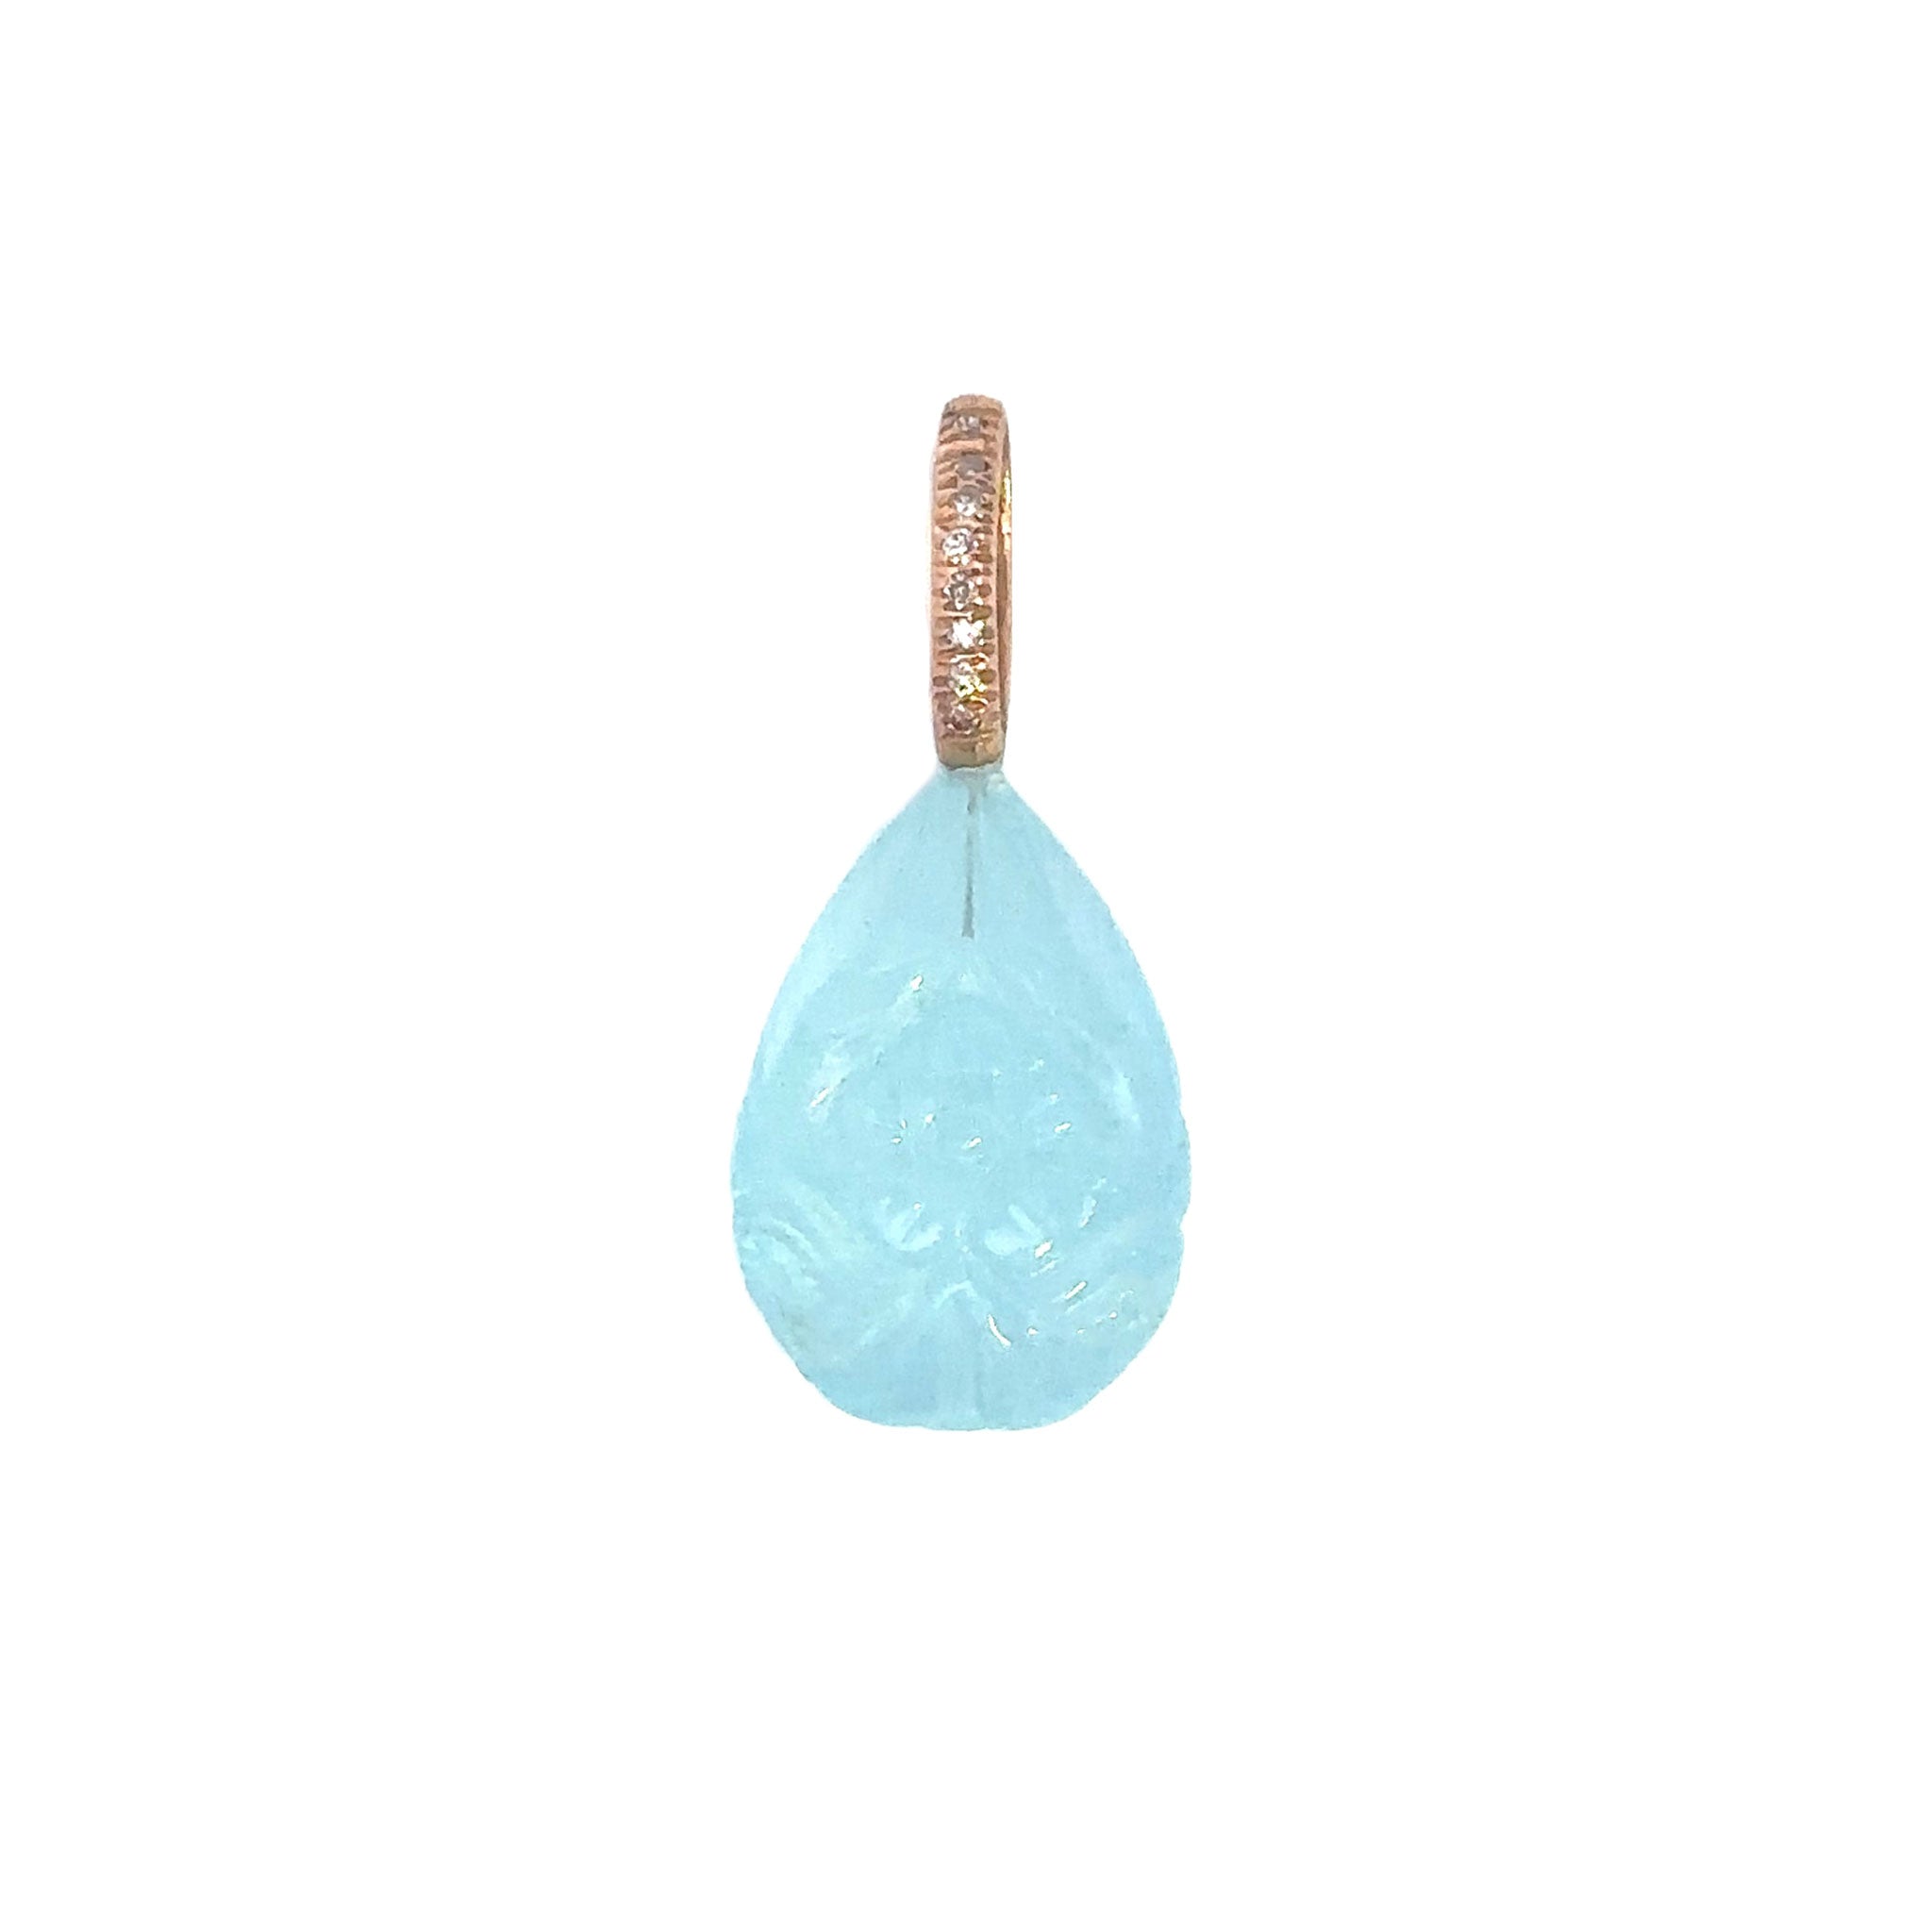 Just Jules carved aquamarine pendant/charm with diamond bale - Be On Park